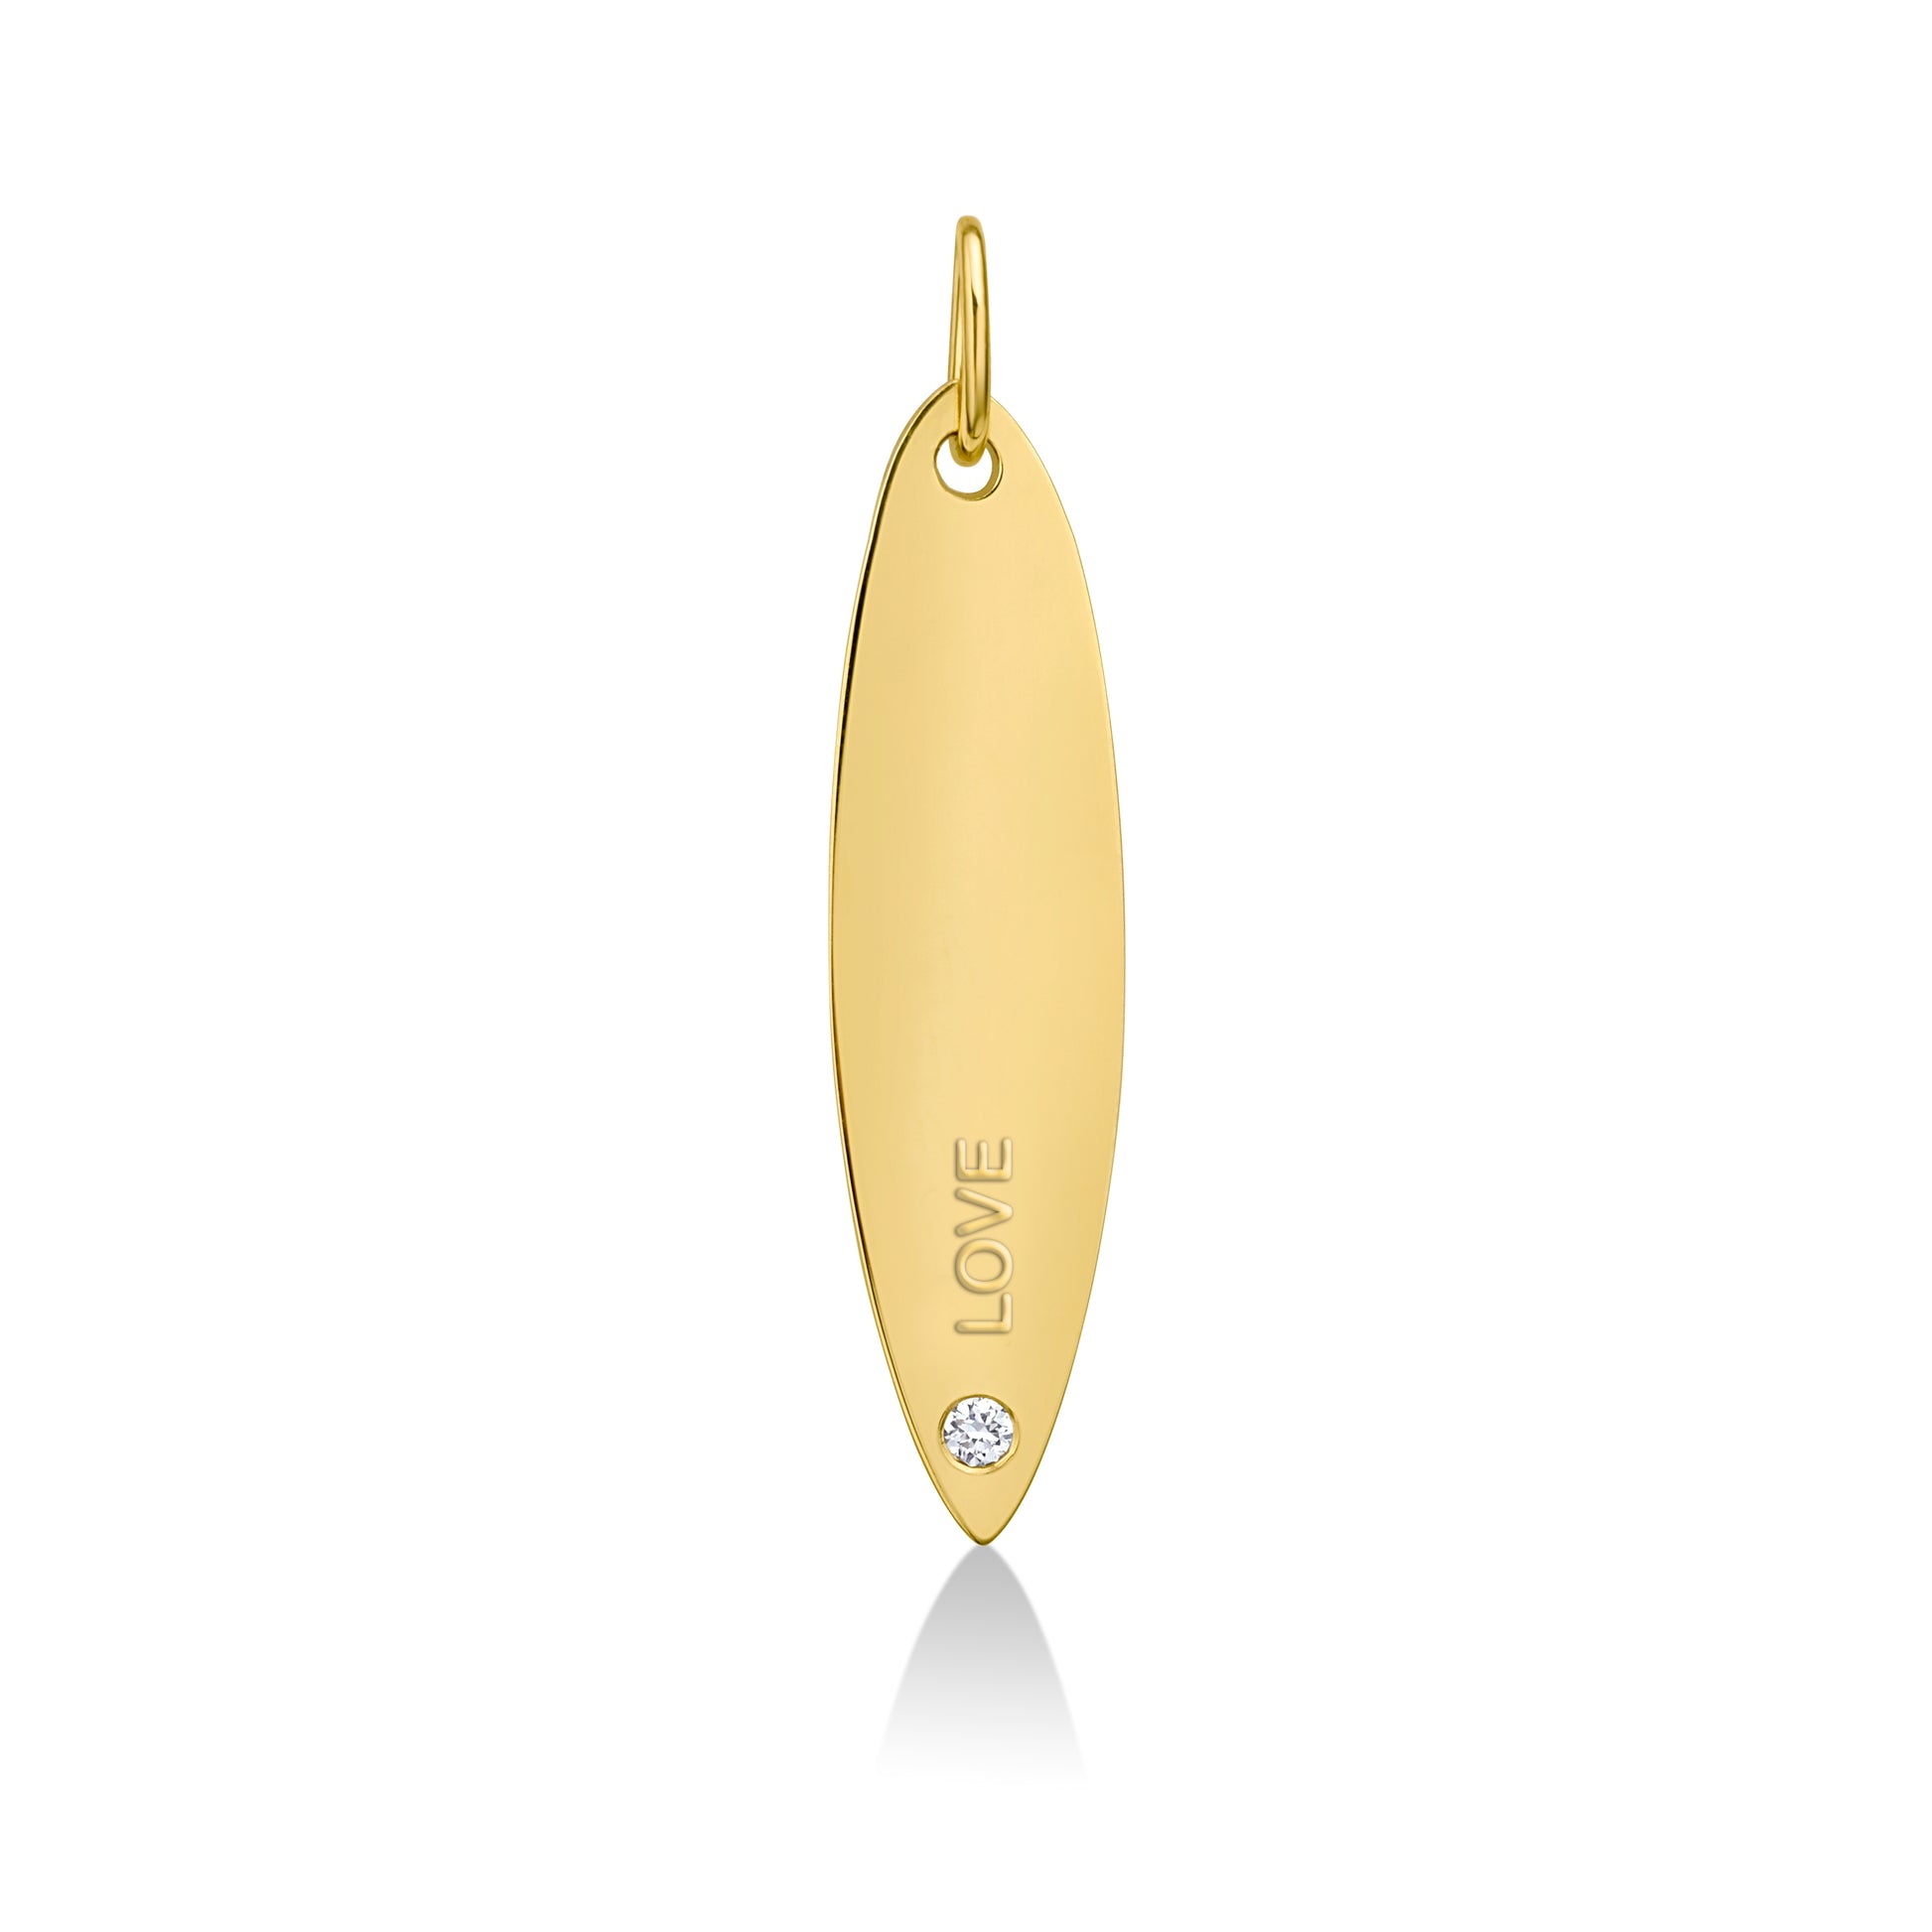 14k gold surfboard charm lock with LOVE engraved and diamond